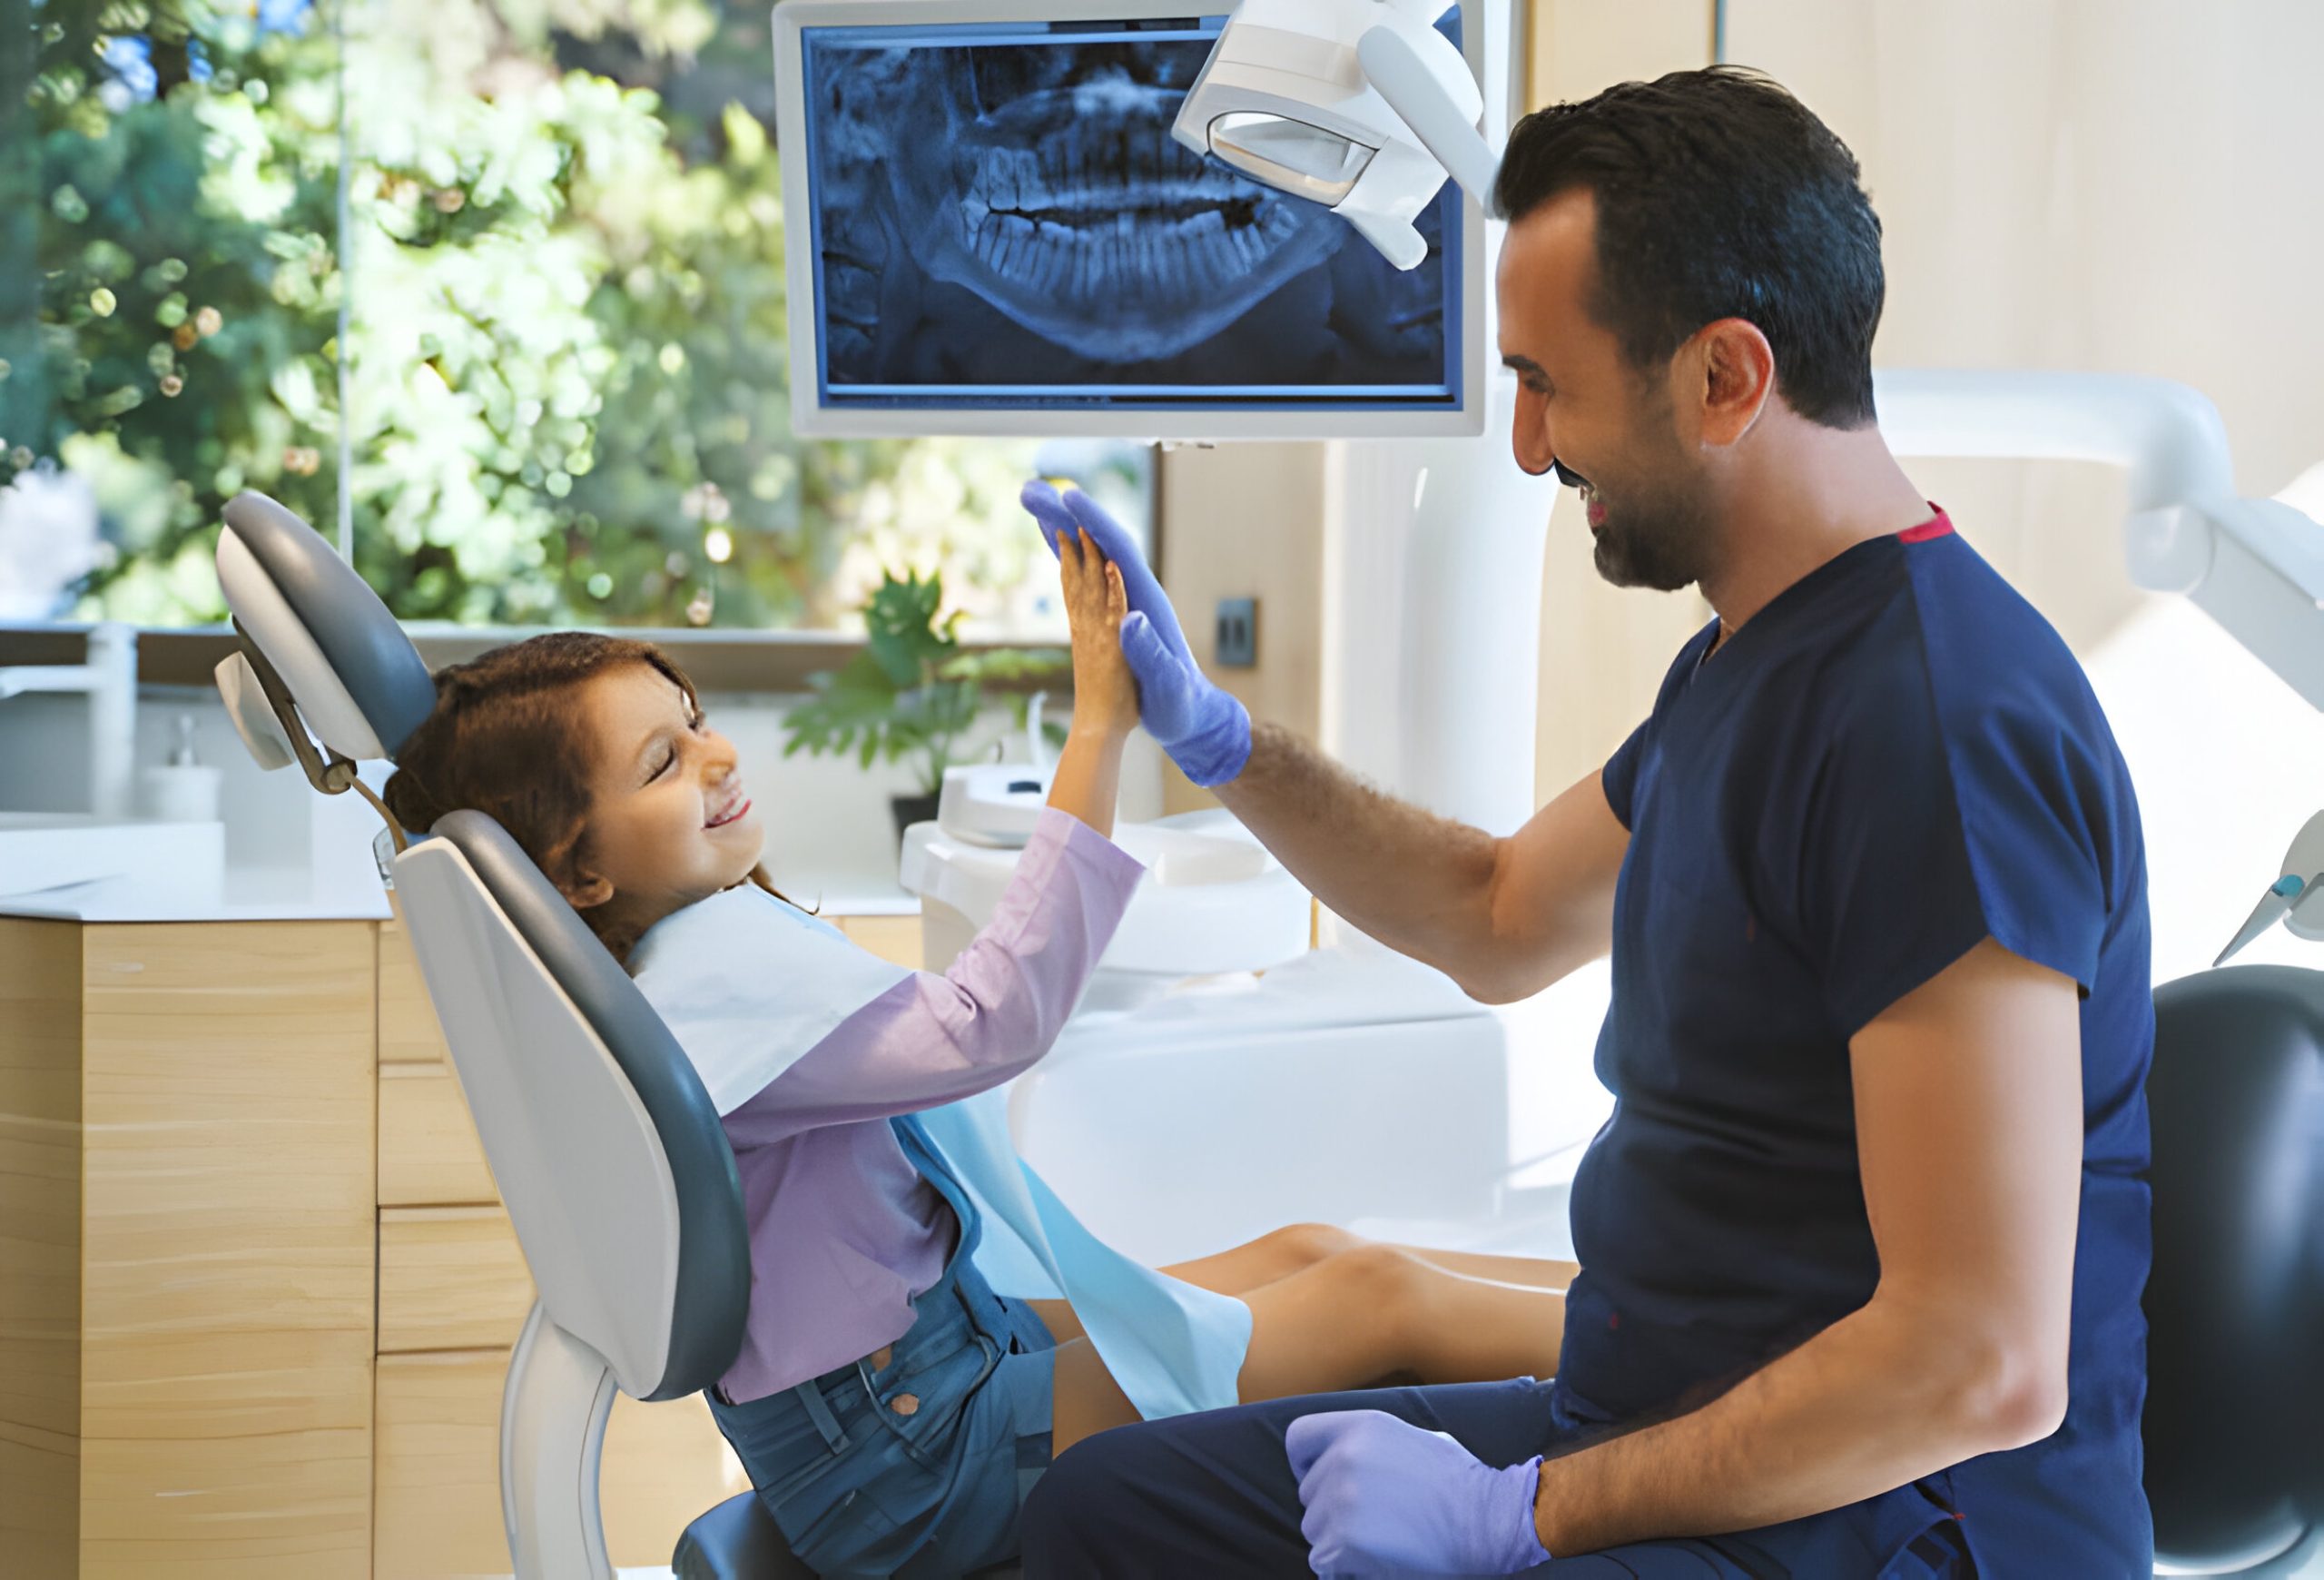 Why Kiefer Family Dental is Your Best Choice in Evansville